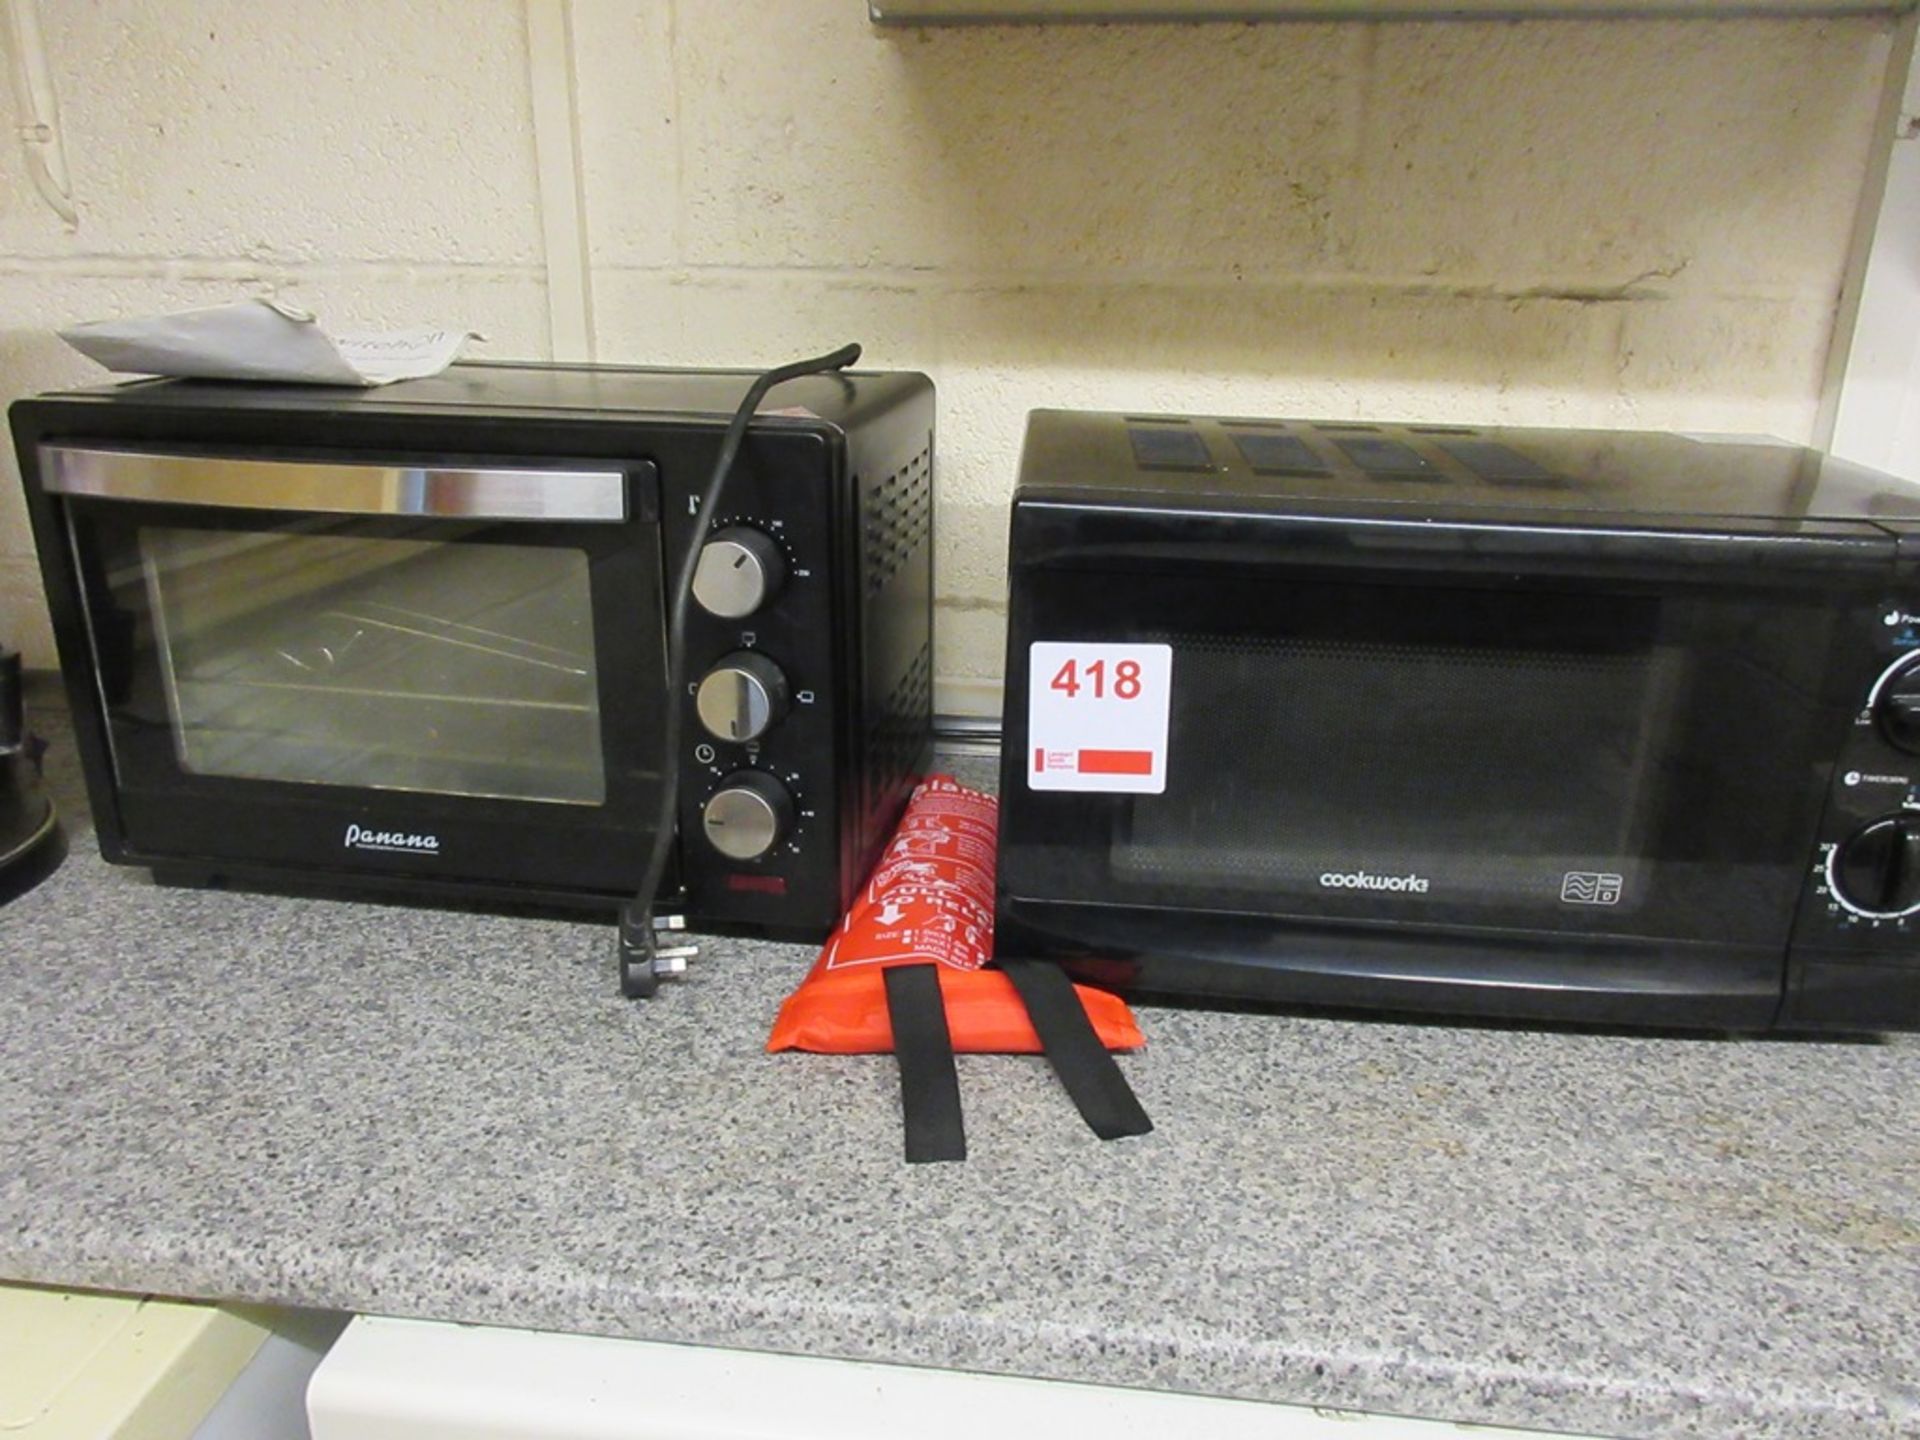 Panana Counter top grill and Cookworks microwave